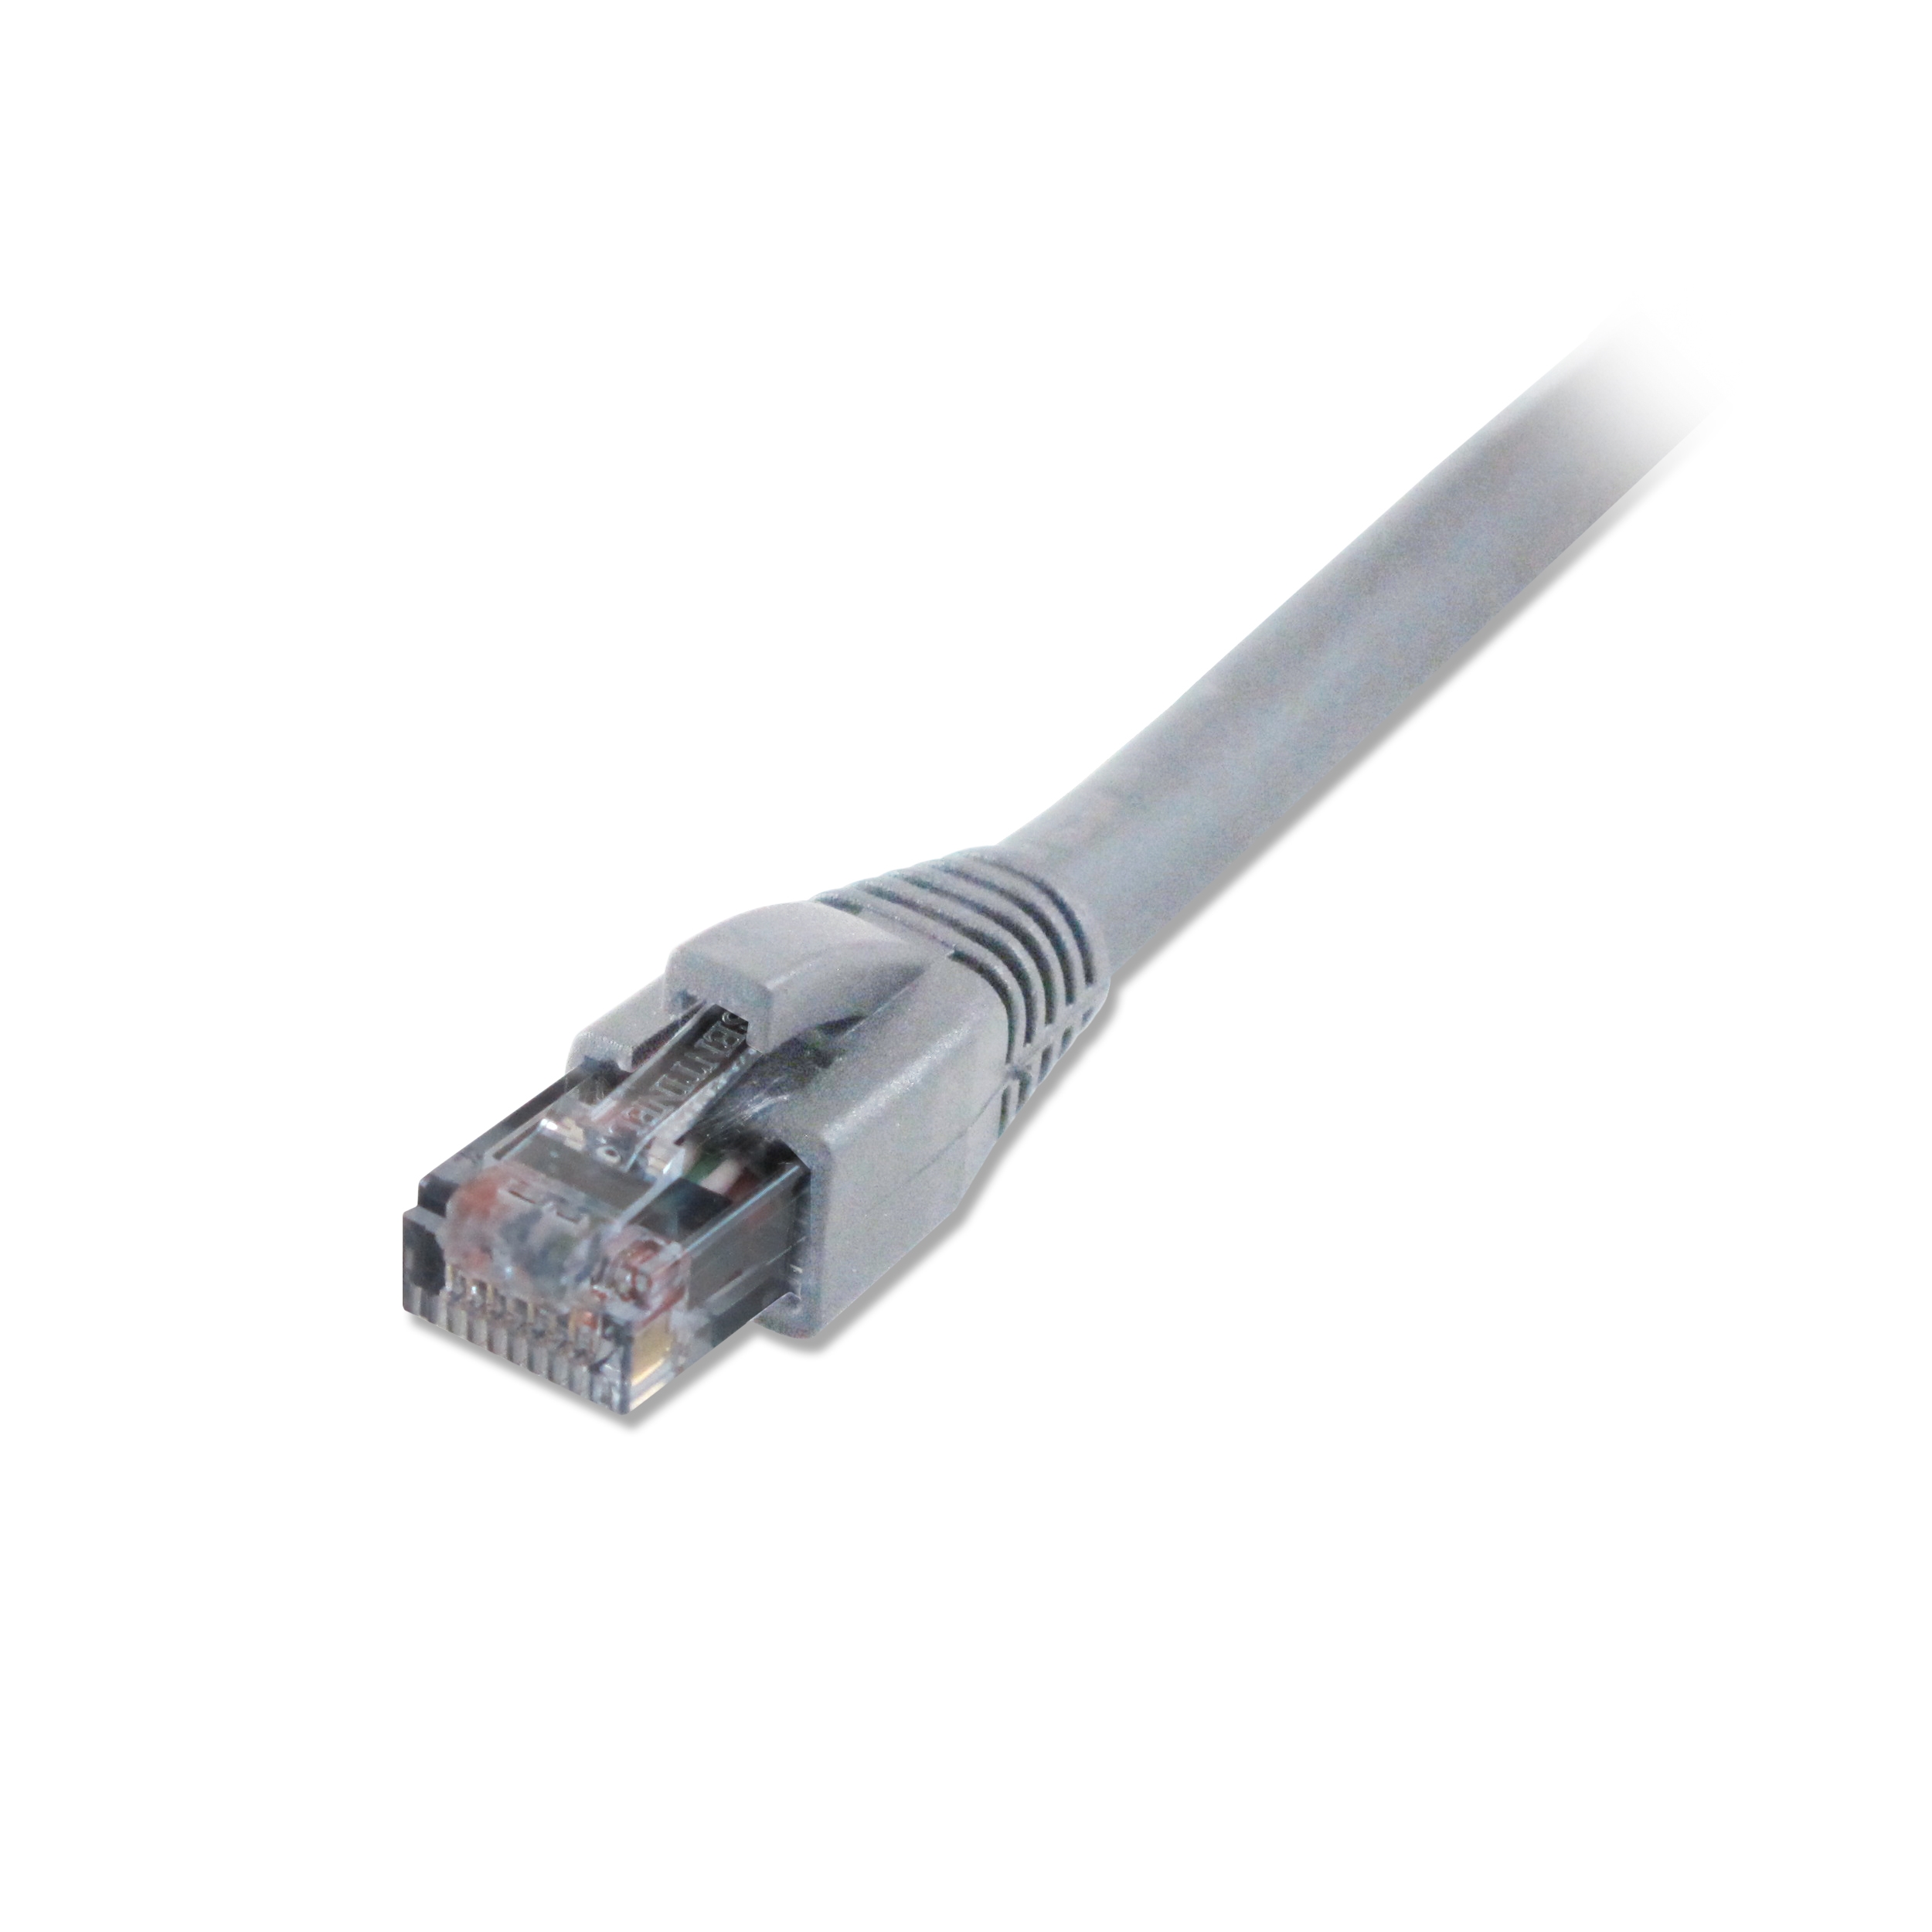 Comprehensive CAT5-350-5GRY Cat5e 350 Mhz Snagless Patch Cable 5ft Gray